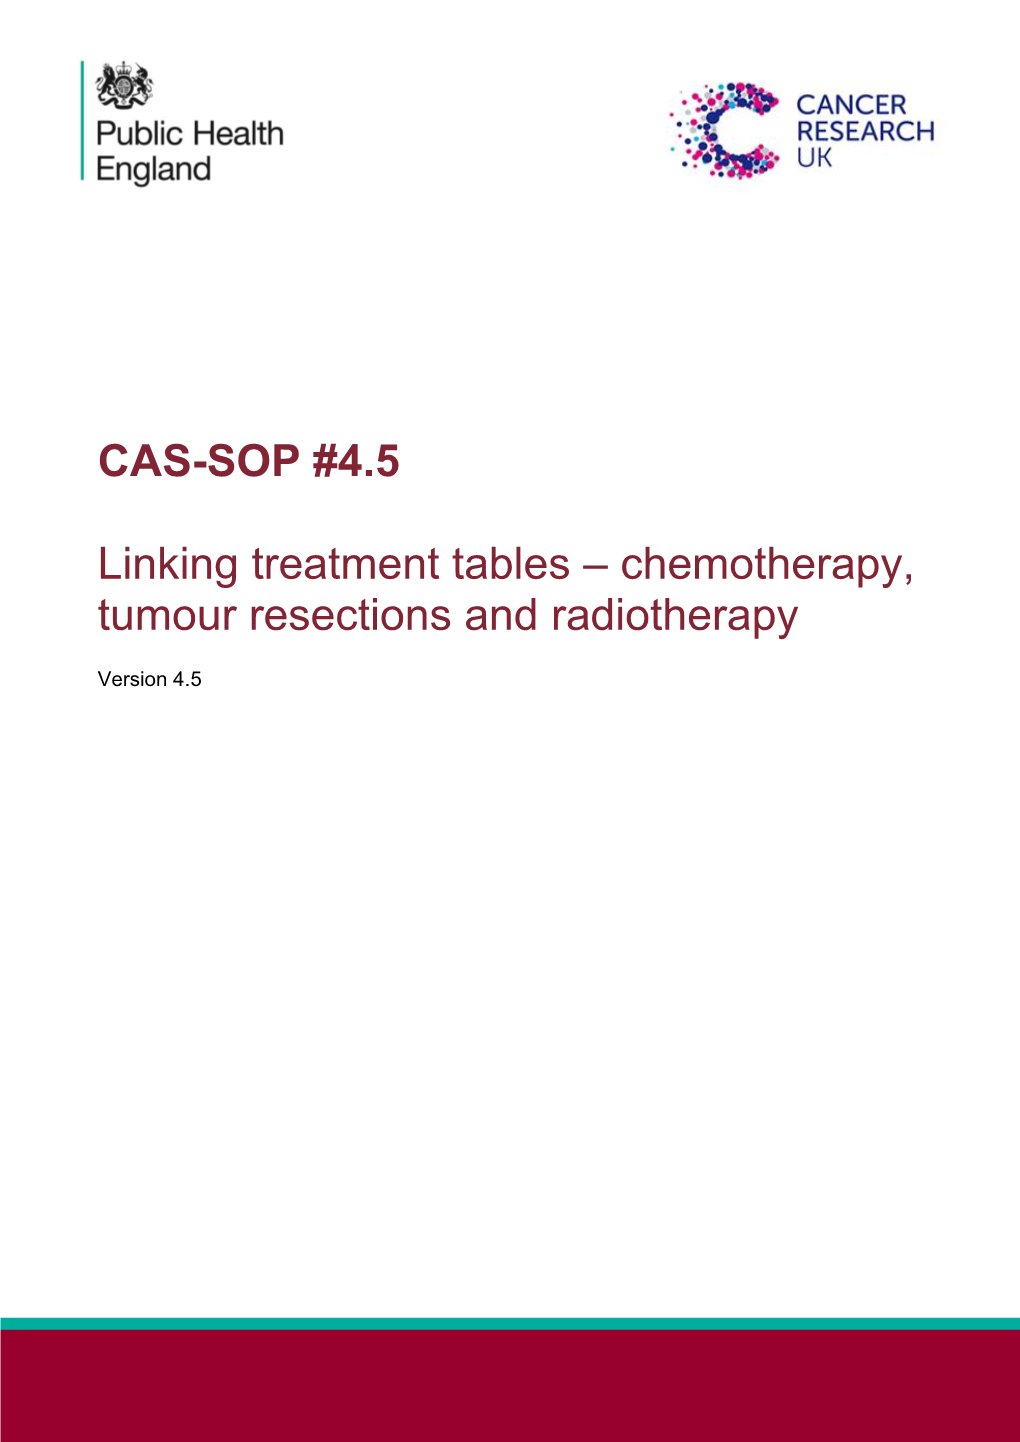 CAS-SOP #4.5 Linking Treatment Tables – Chemotherapy, Tumour